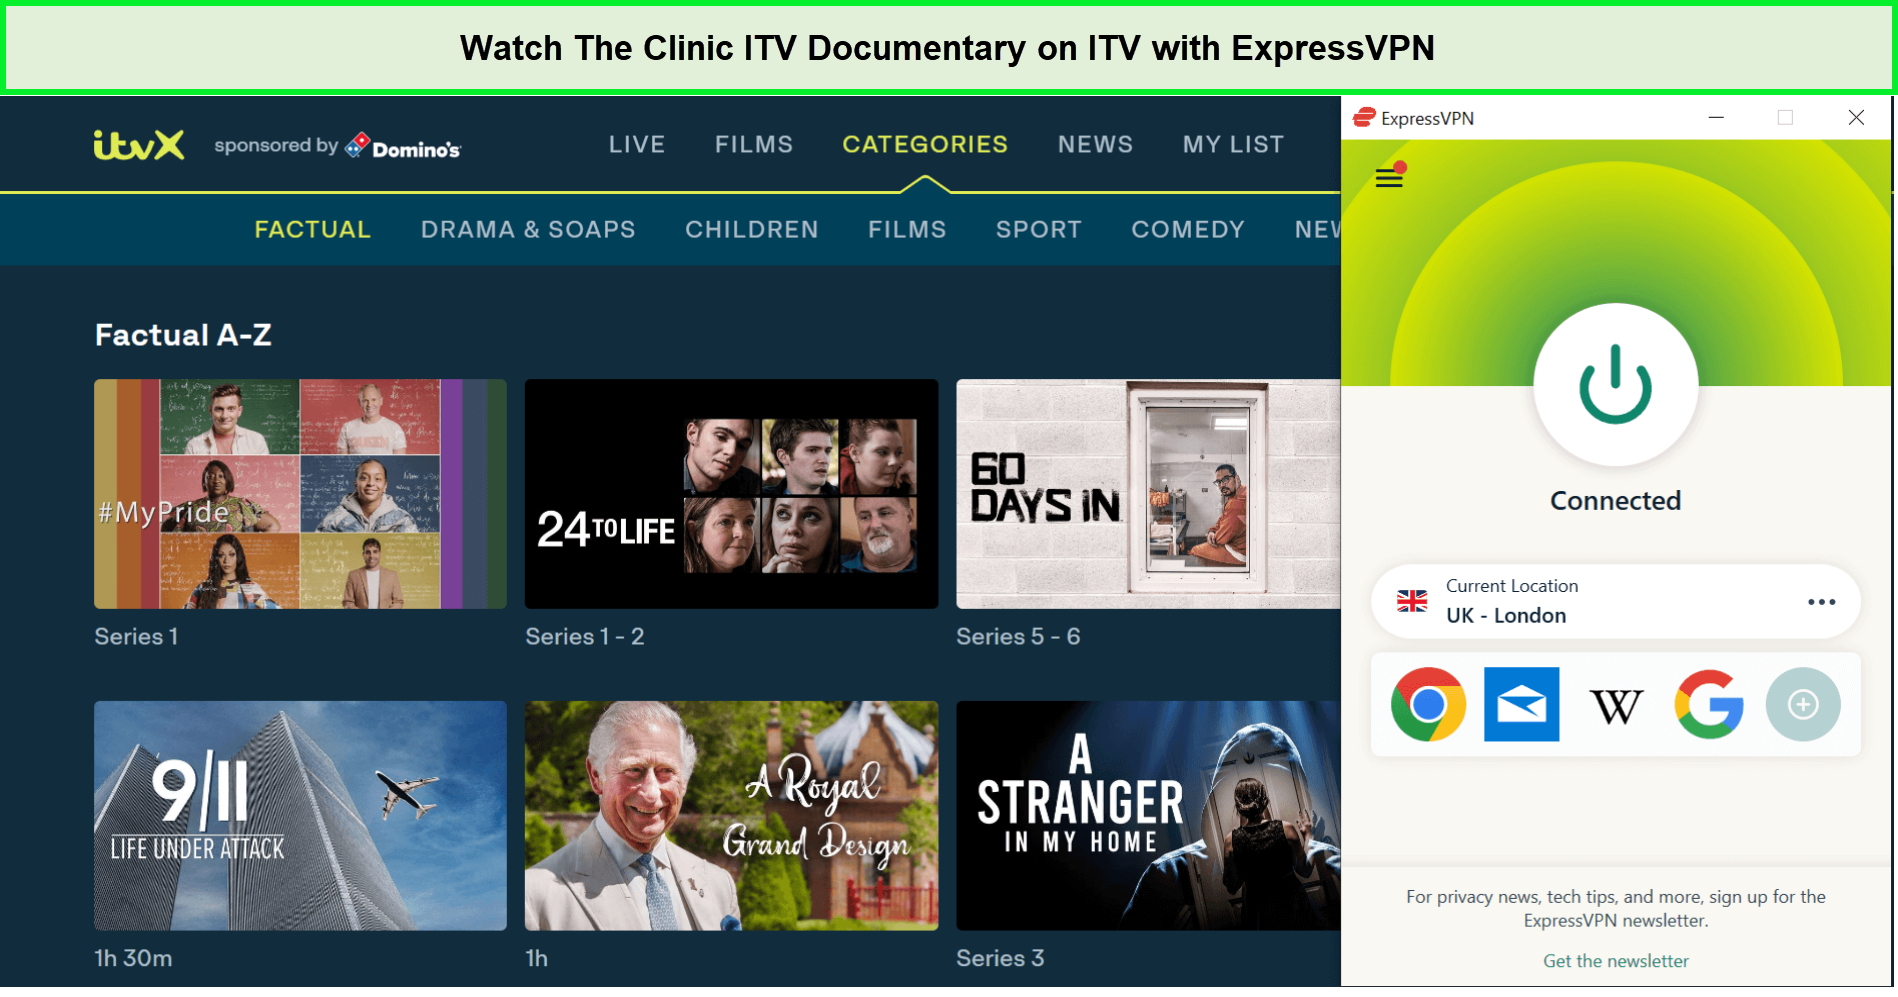 Watch-The-Clinic-ITV-Documentary-in-USA-on-ITV-with-ExpressVPN.